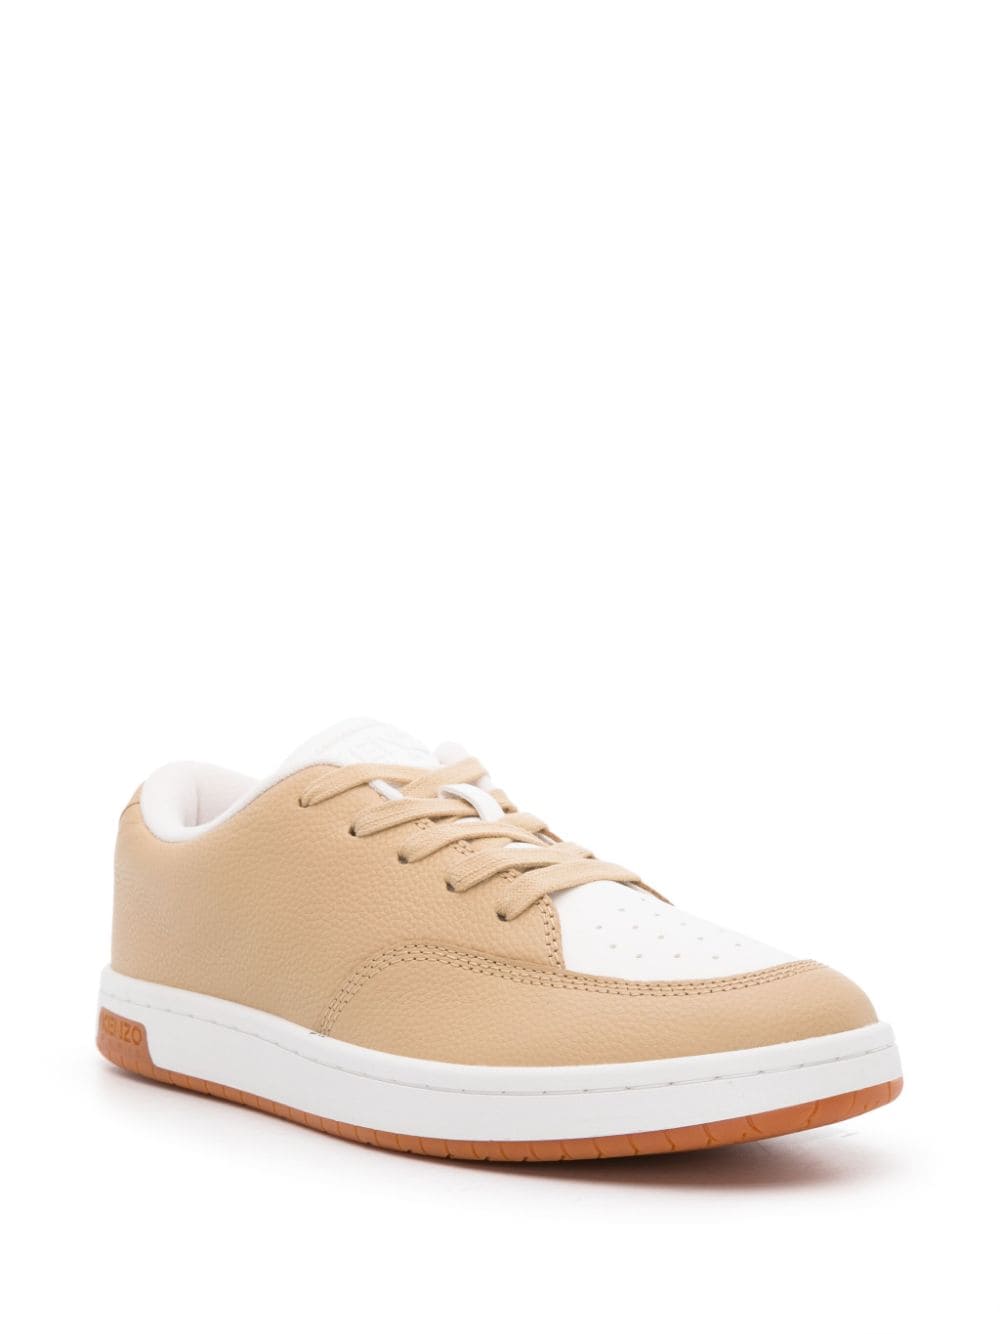 Kenzo Dome lace-up sneakers - Beige